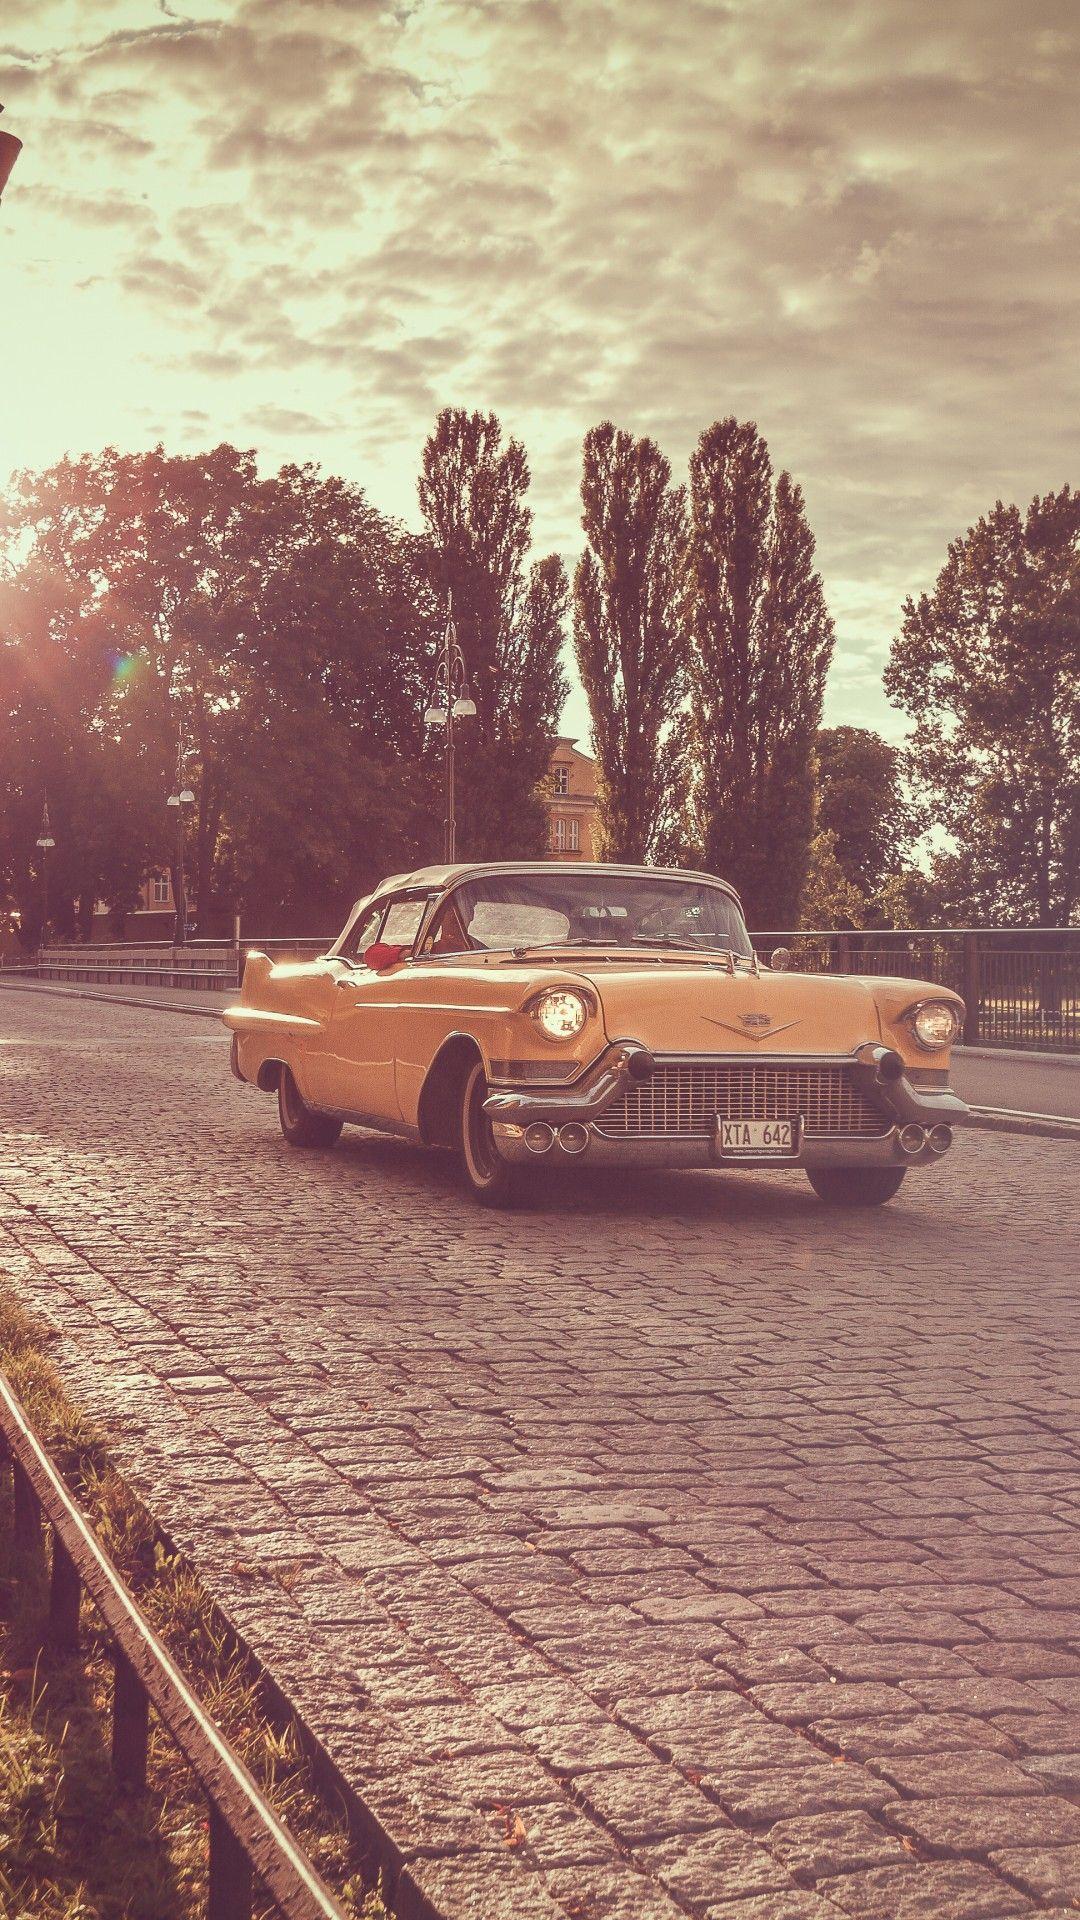 Vintage Car iPhone Wallpapers - Top Free Vintage Car iPhone Backgrounds ...